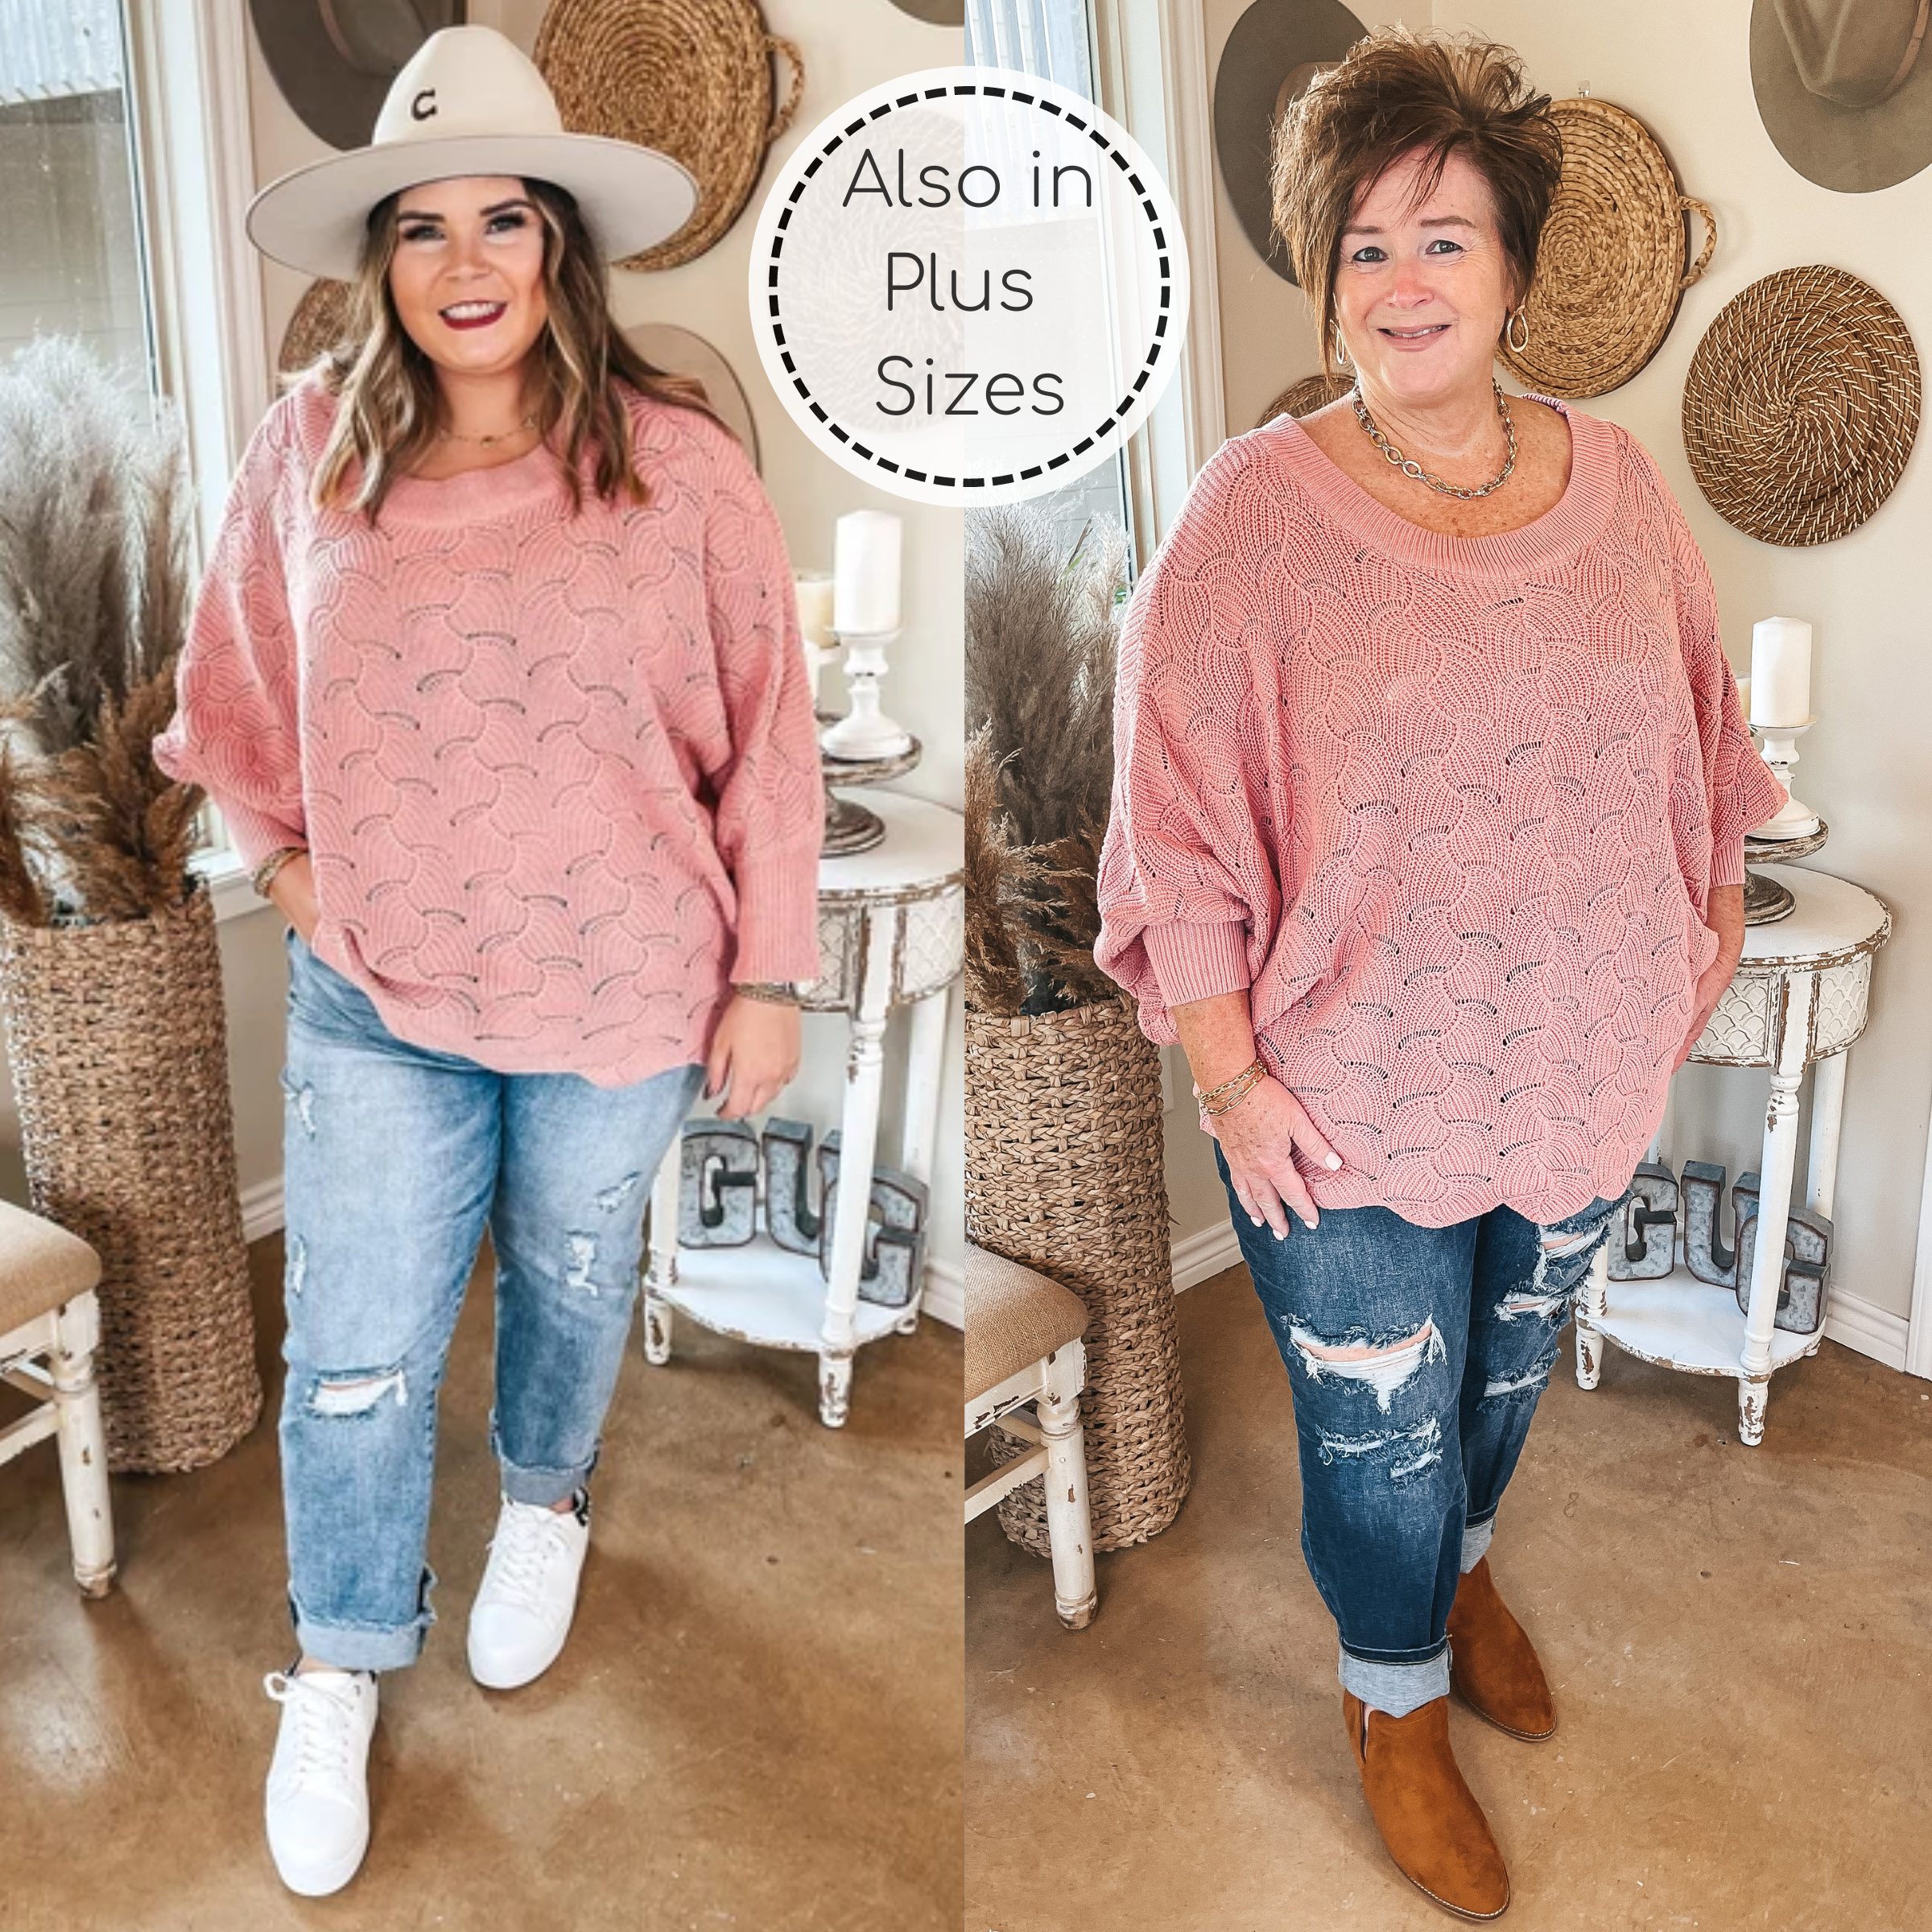 So Agreeable Knit Dolman Sweater with Scalloped Hemline in Blush Pink - Giddy Up Glamour Boutique